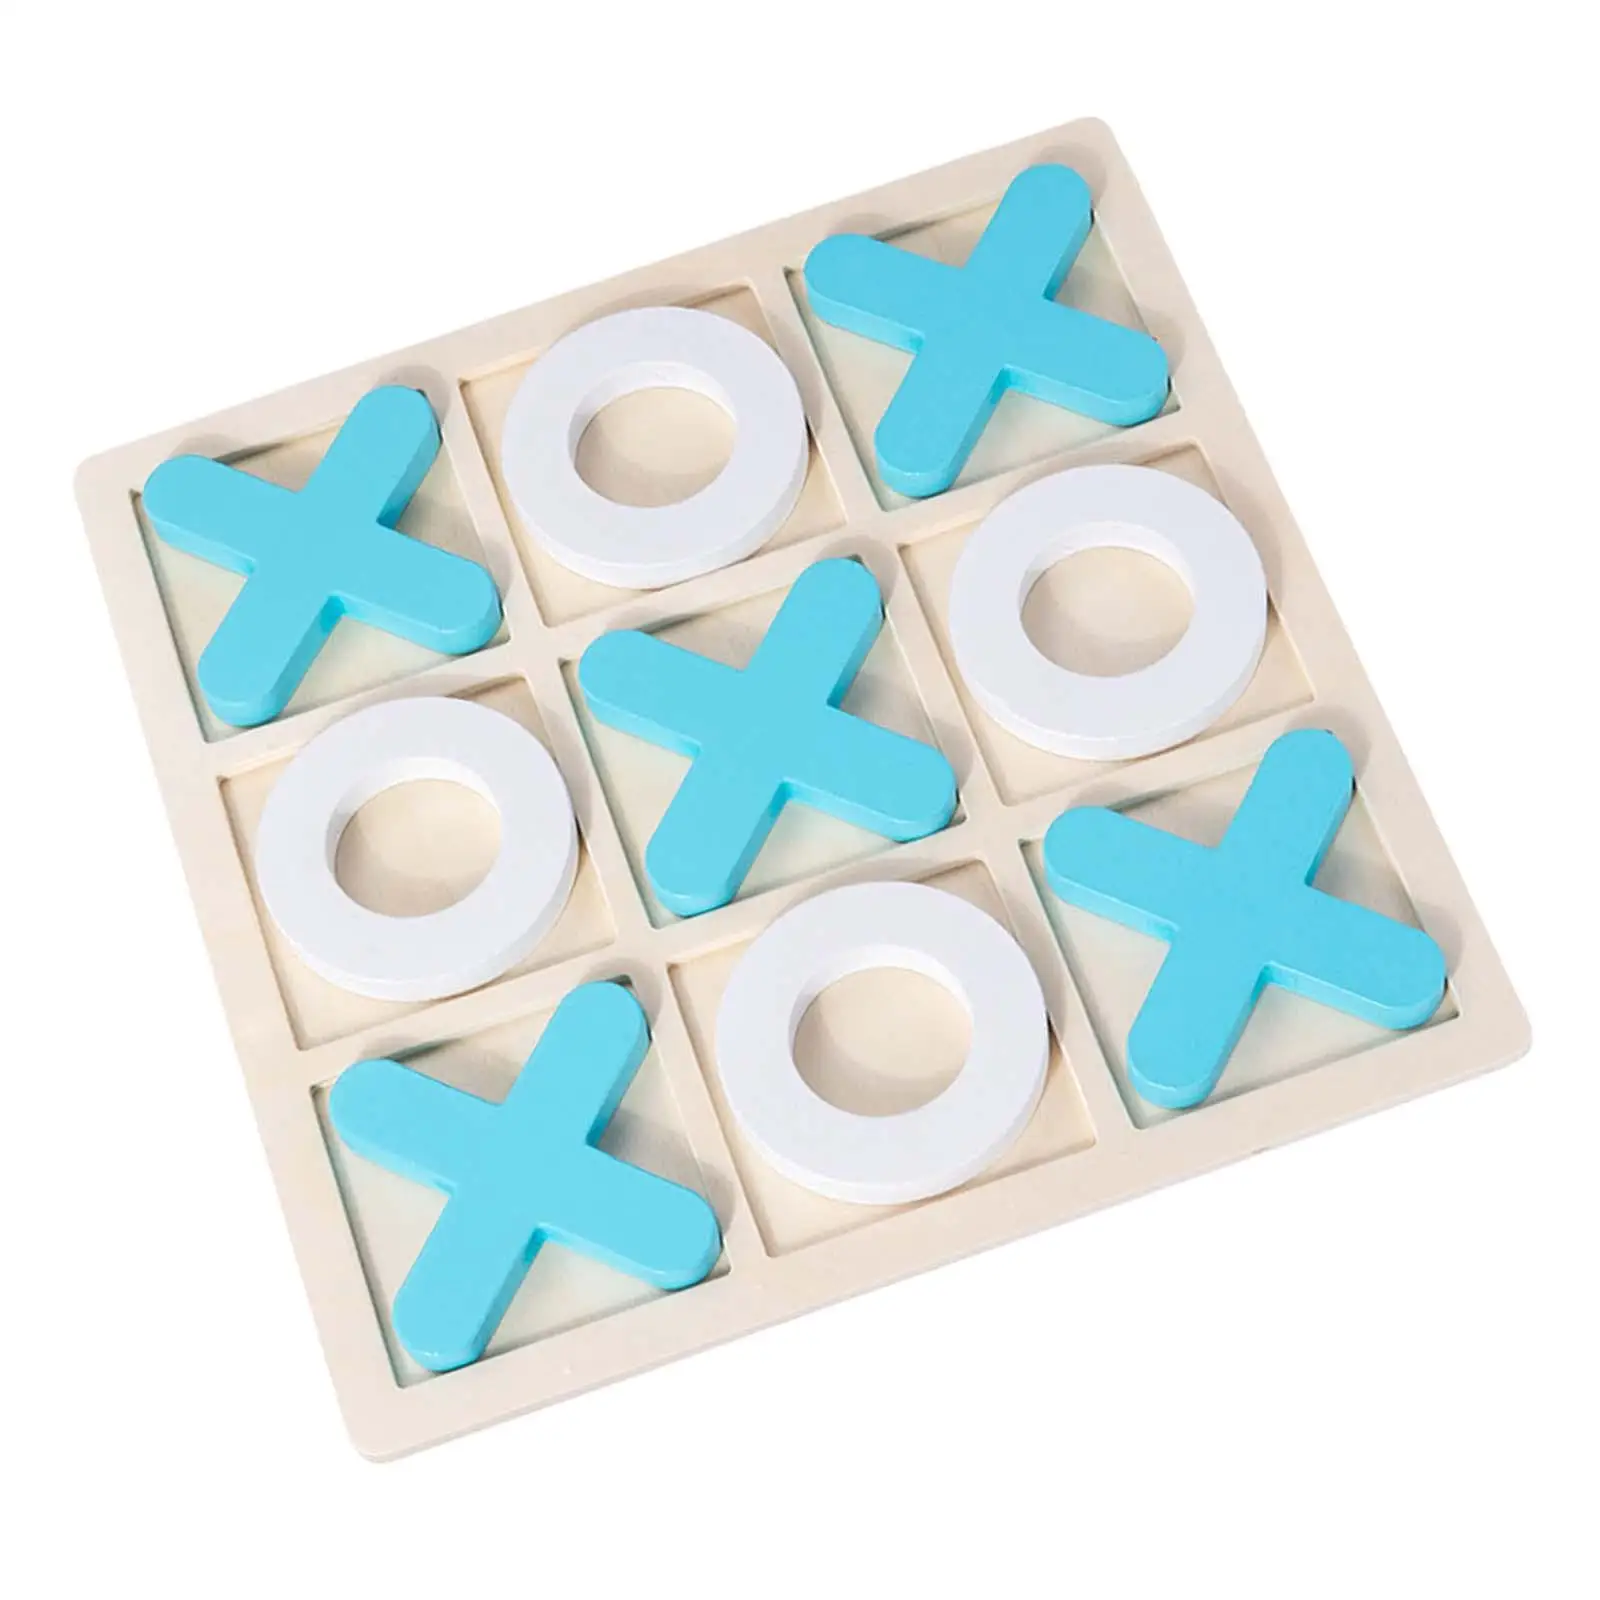 Wooden Tic TAC Toe Game XO Chess Board Game Educational Toys Handmade Noughts